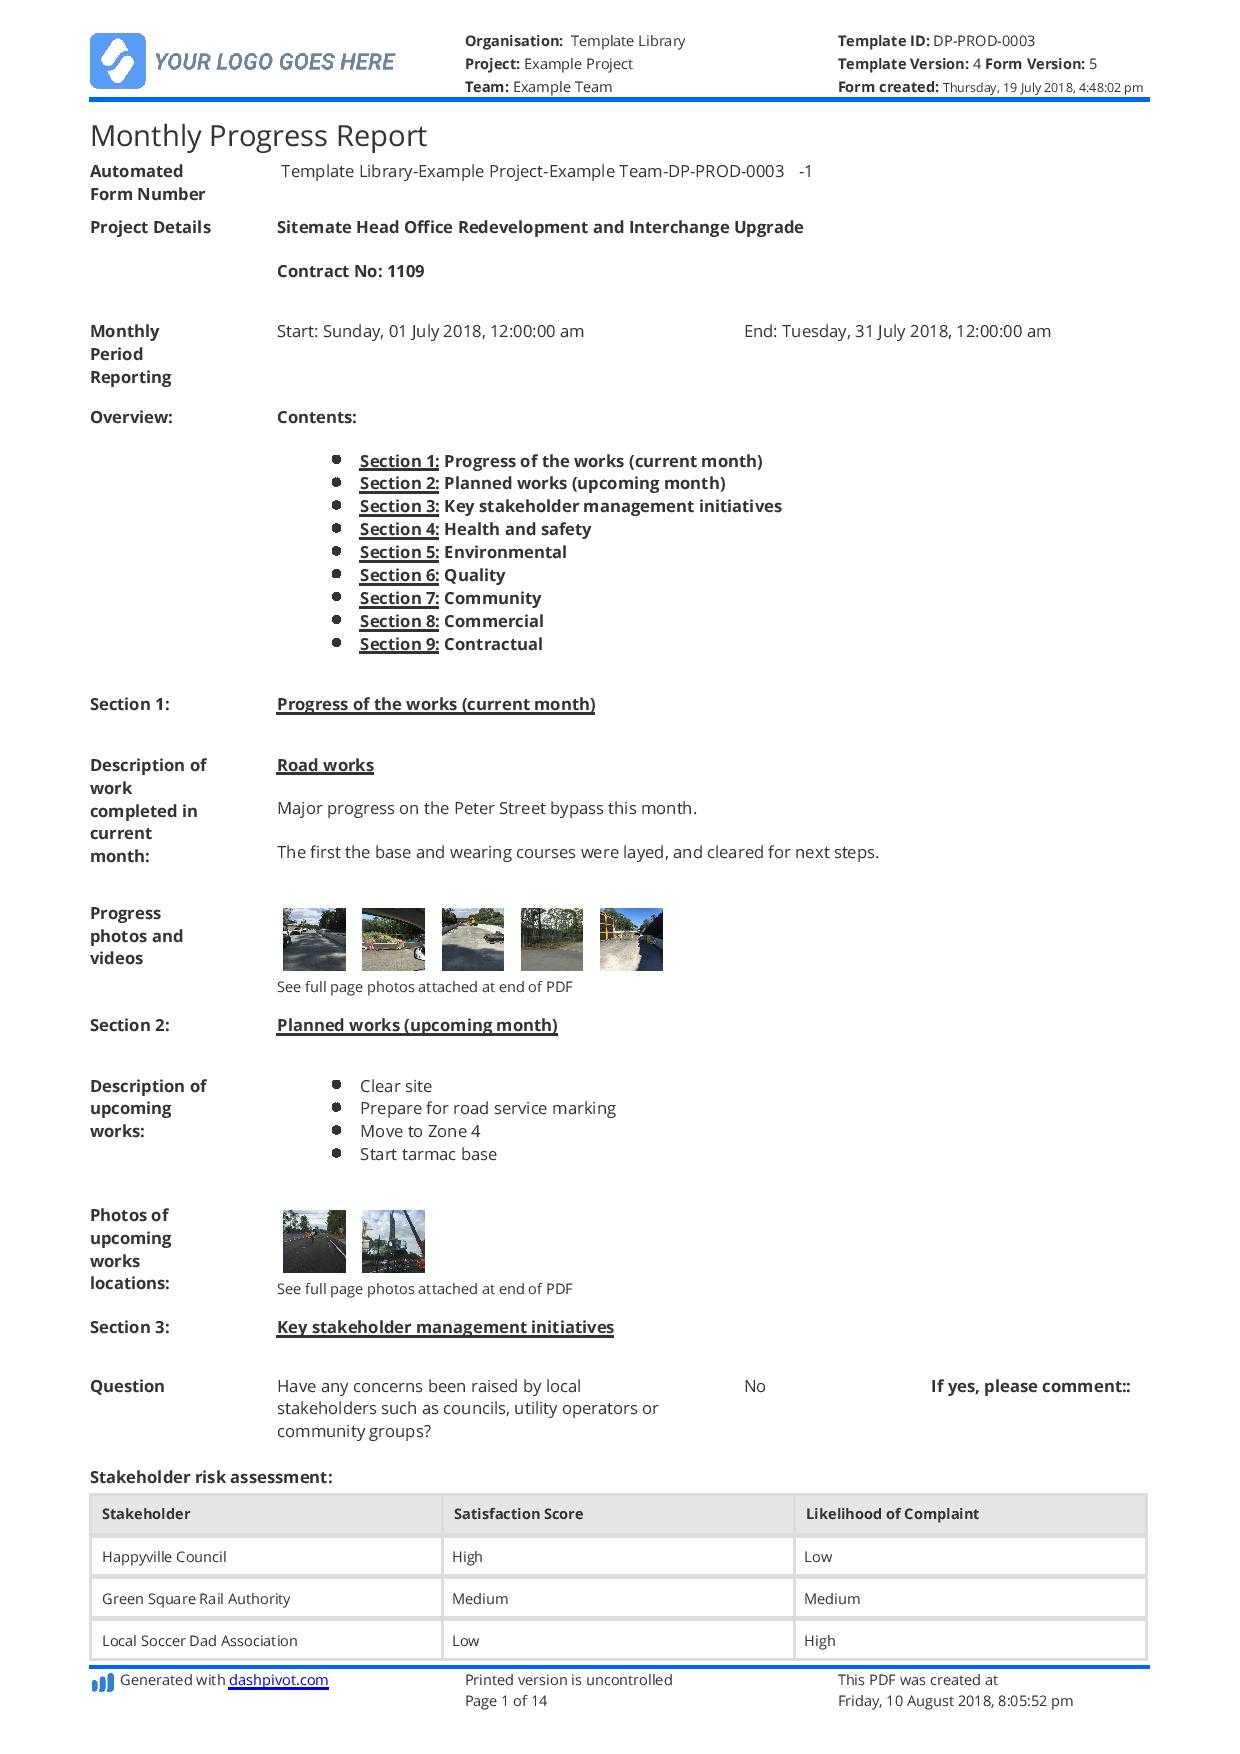 Monthly Construction Progress Report Template: Use This Pertaining To Engineering Progress Report Template